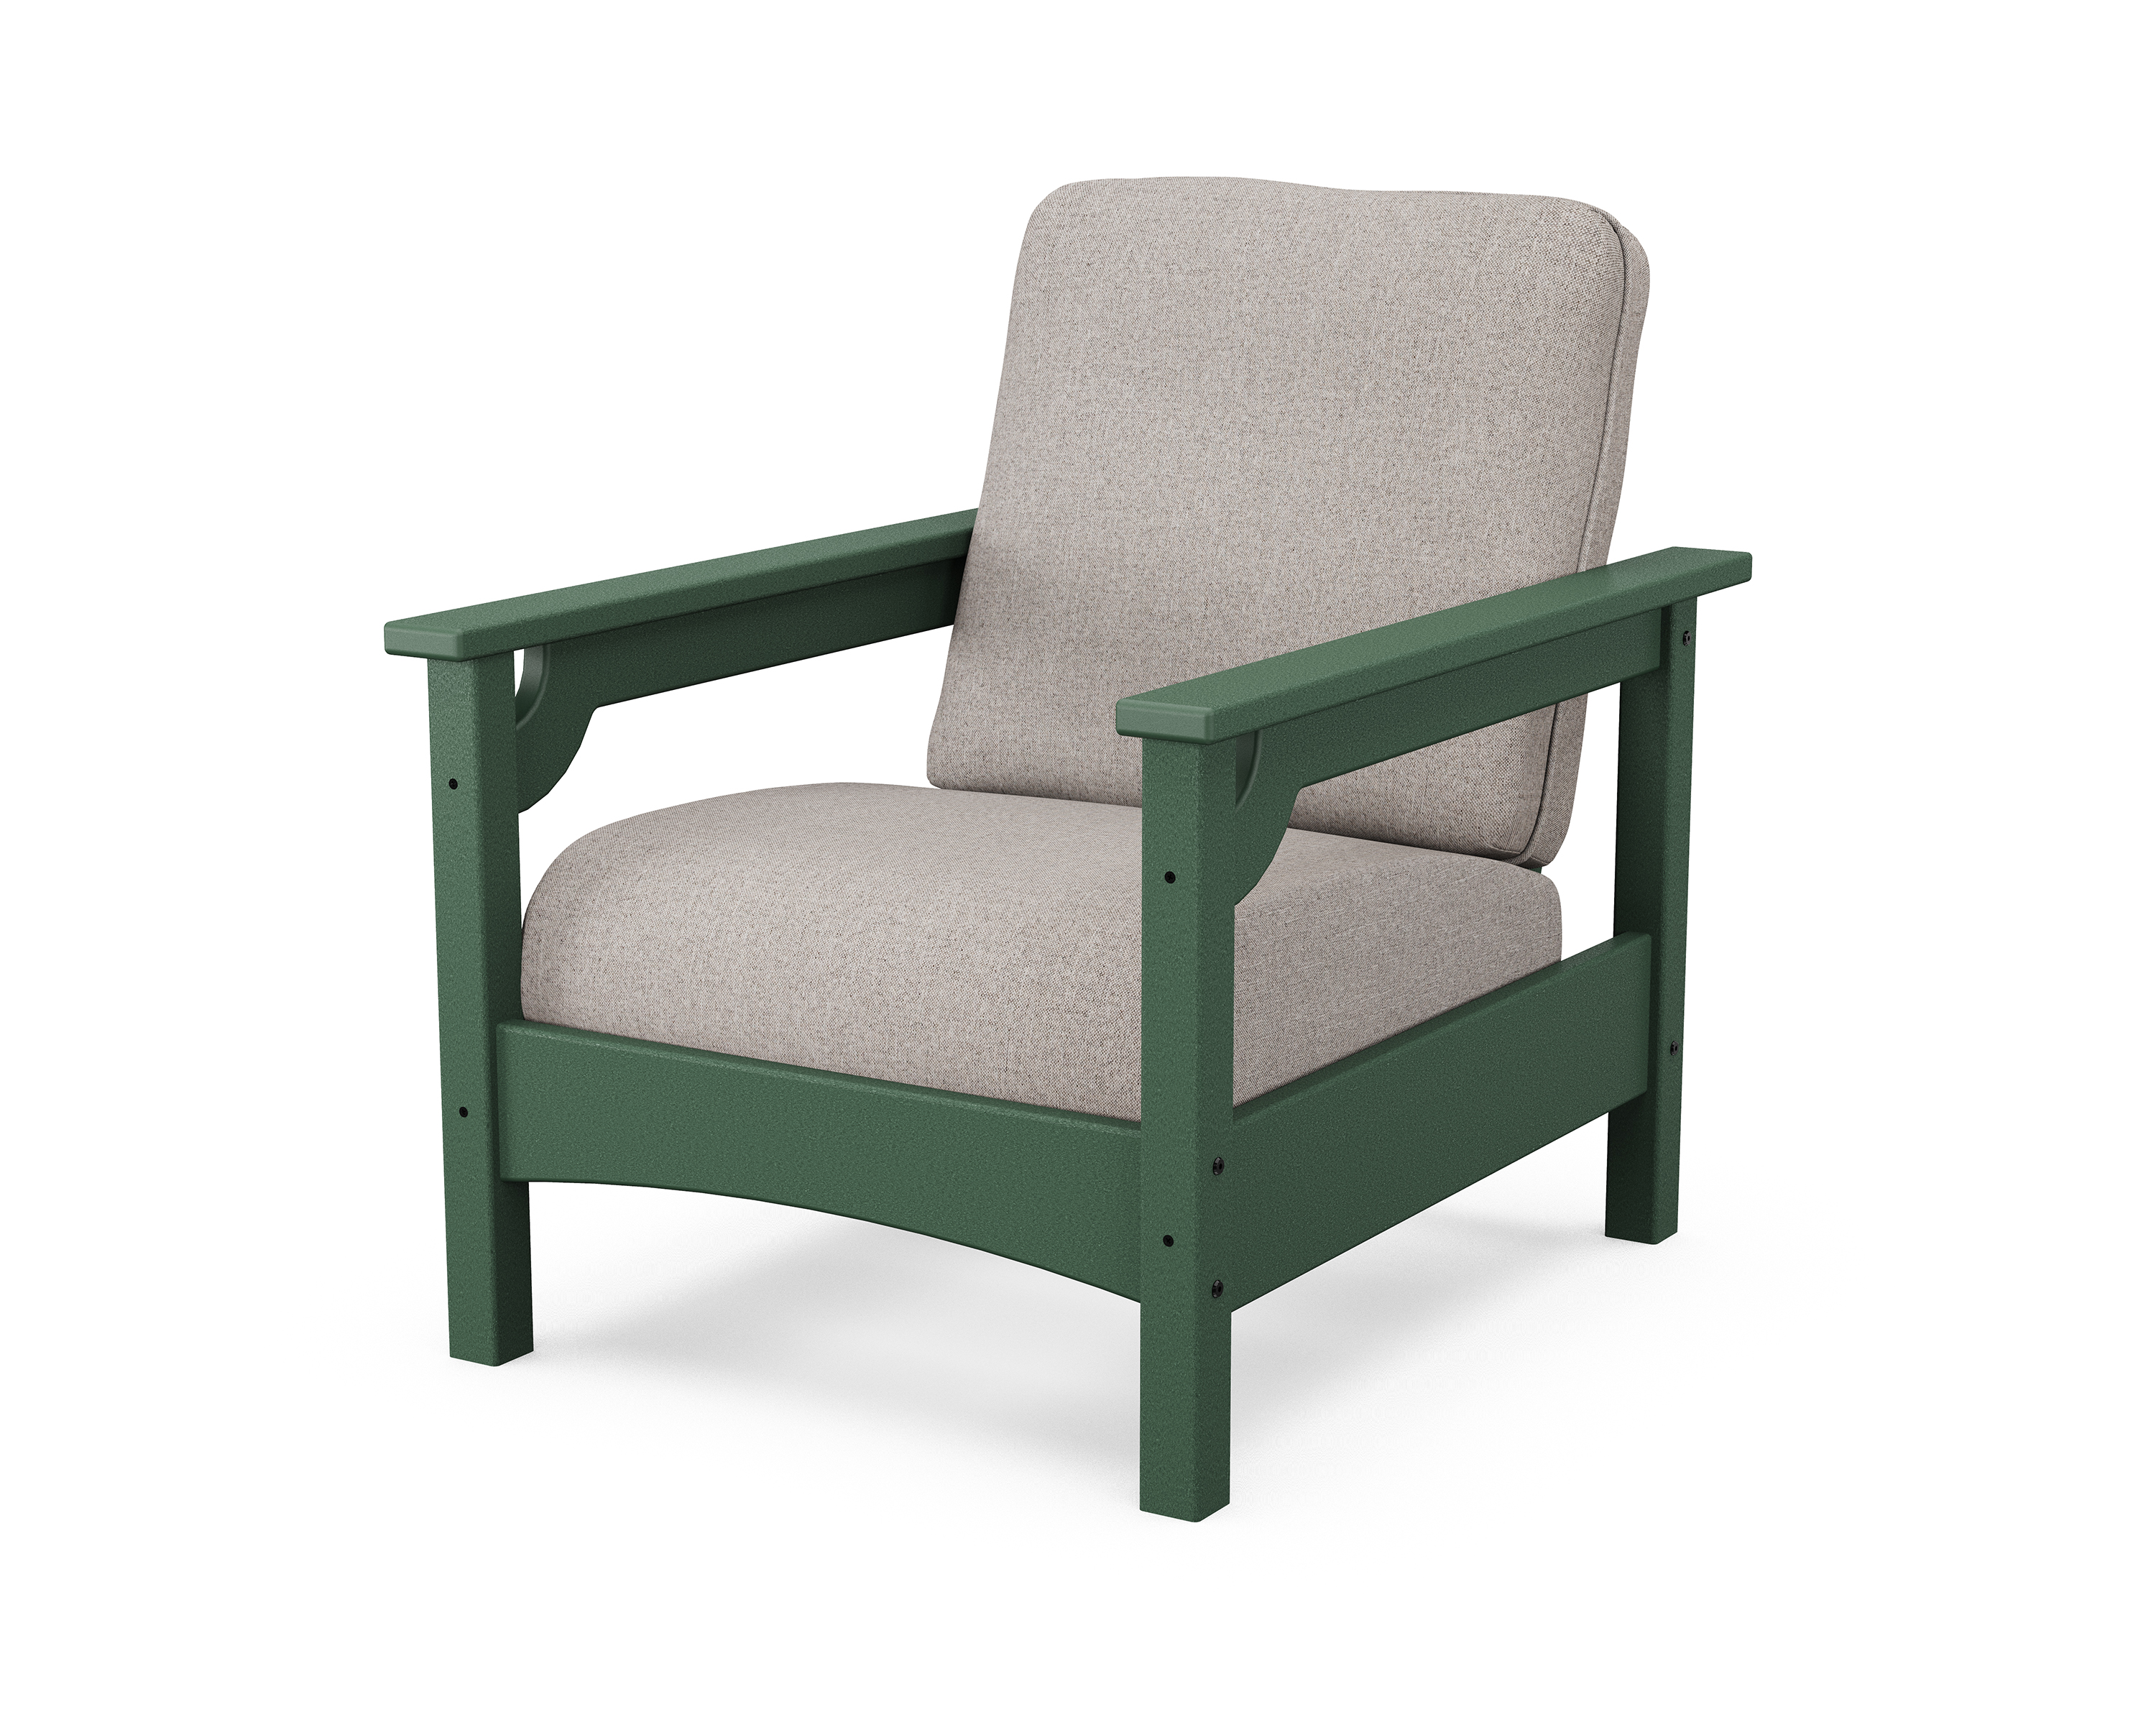 club chair in green / weathered tweed product image